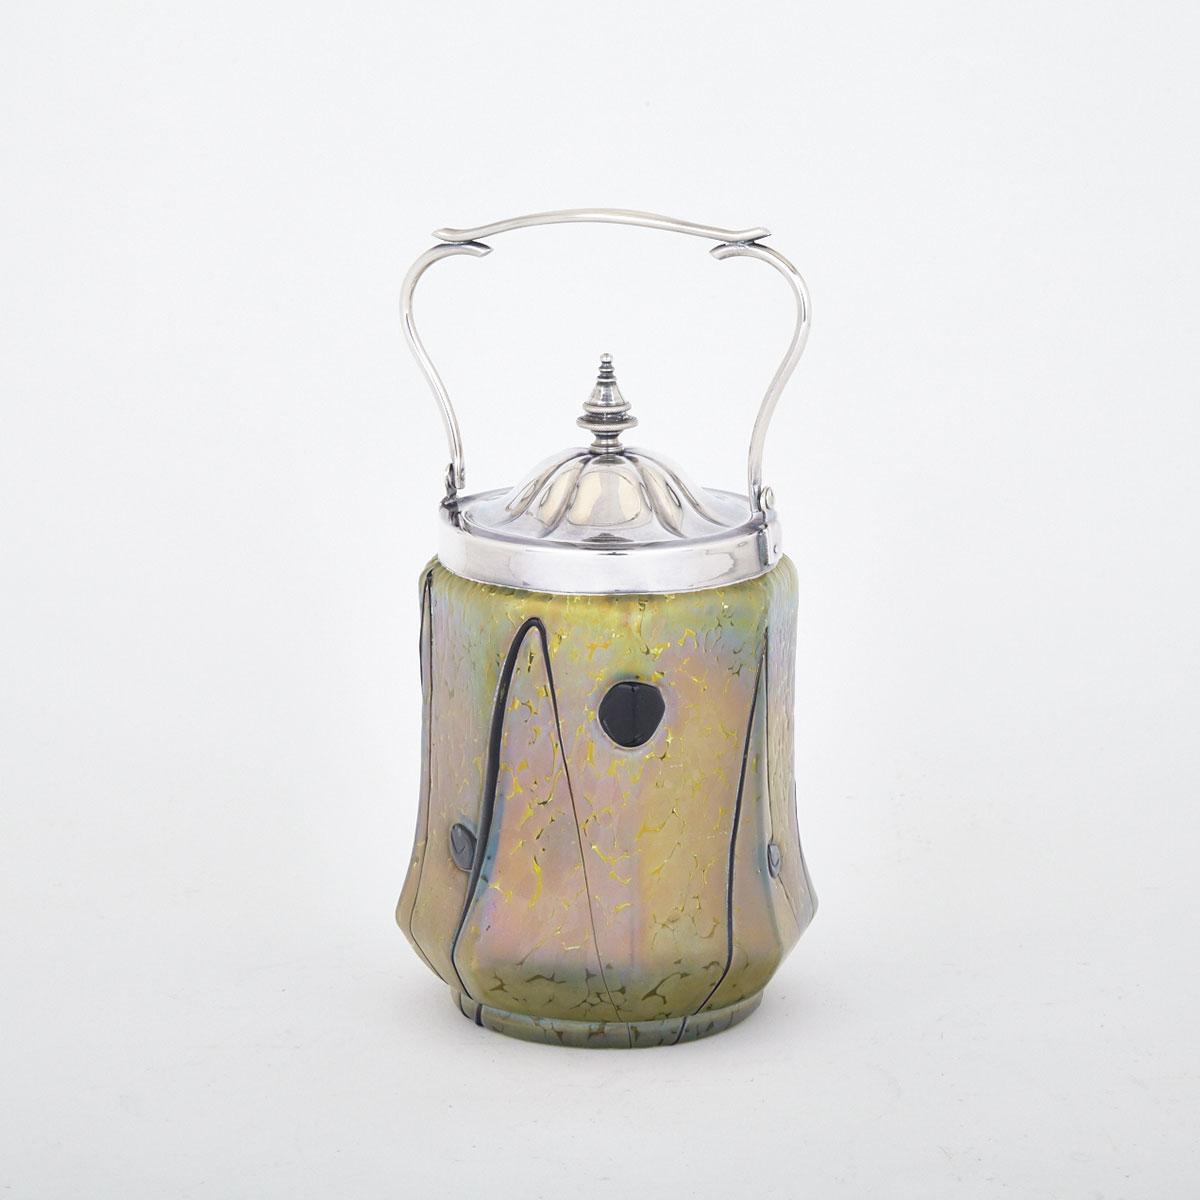 Austrian Silver Plate Mounted Iridescent Glass Biscuit Jar, early 20th century